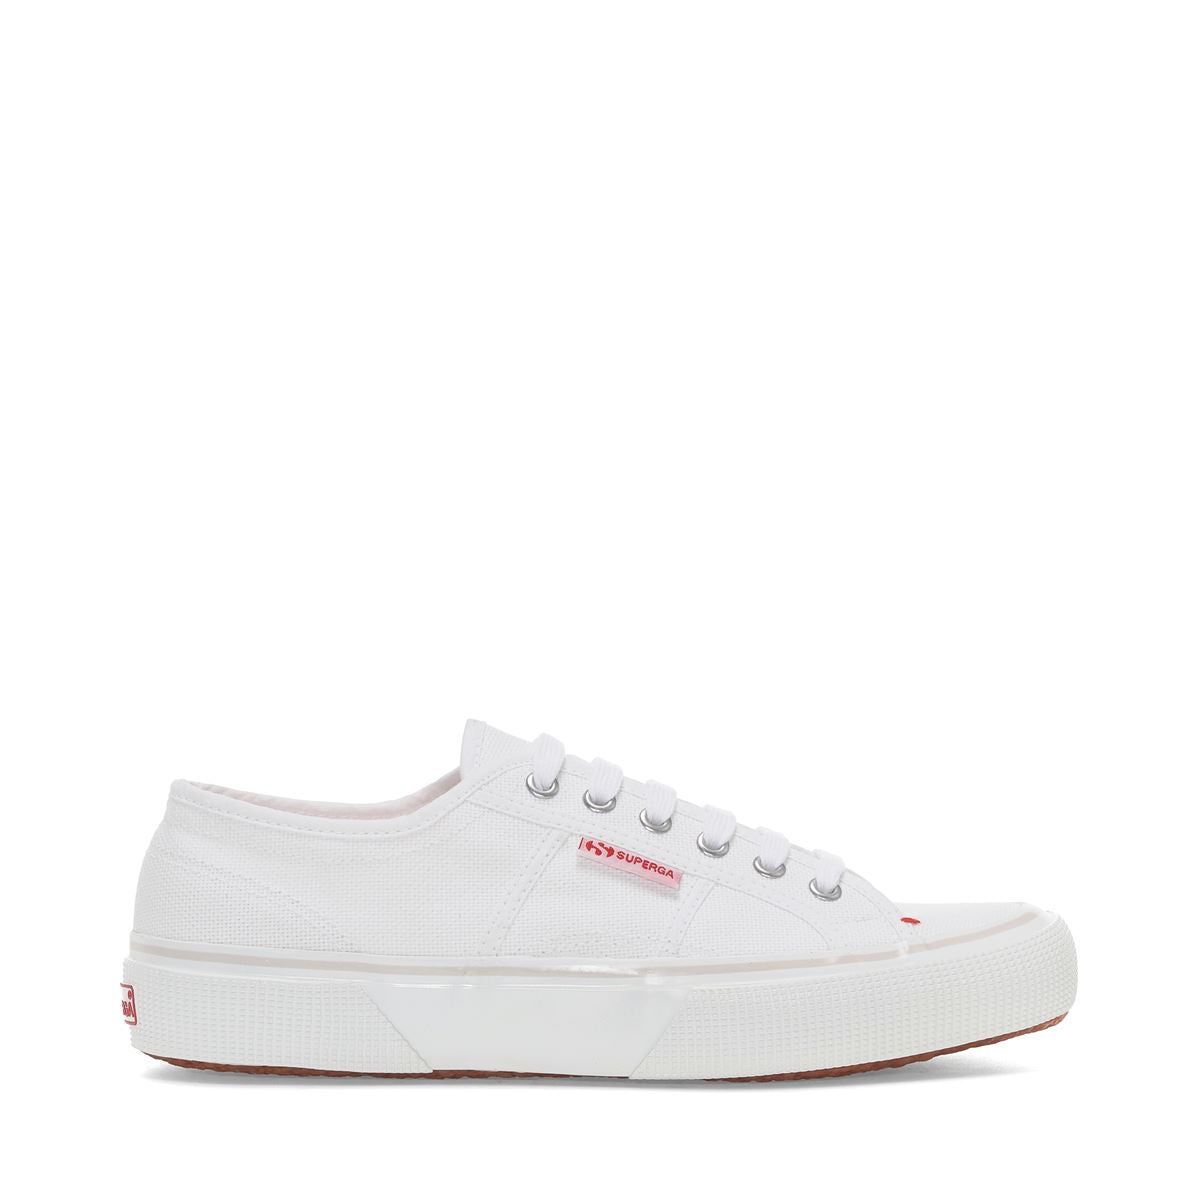 Superga 2490 Bold Sneakers - White Red. Side view.